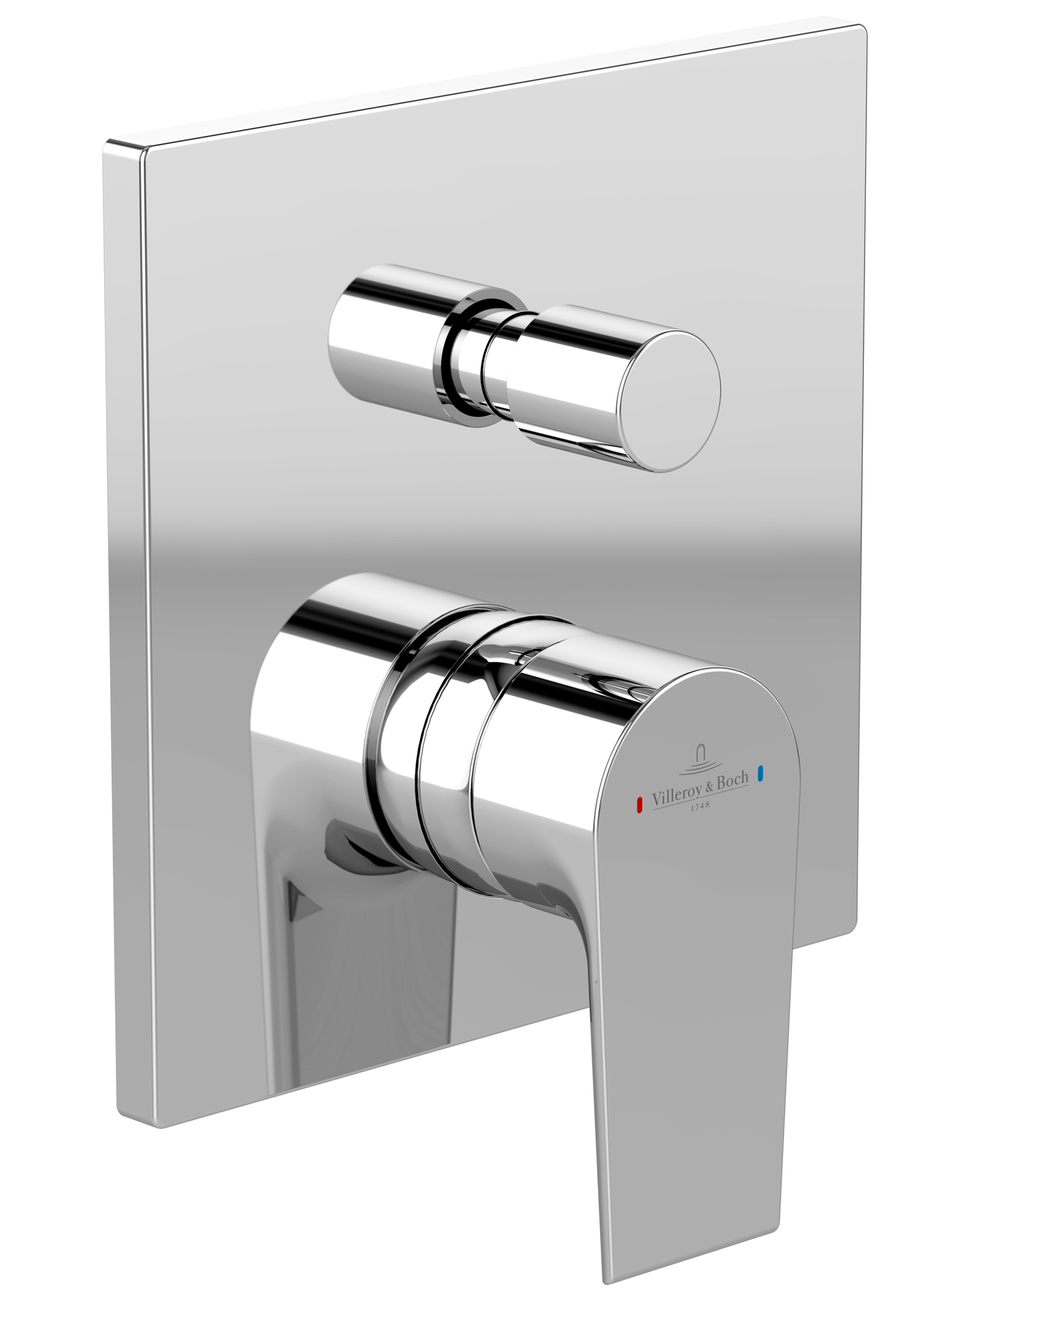 Liberty Concealed Single-lever Bath & Shower Mixer